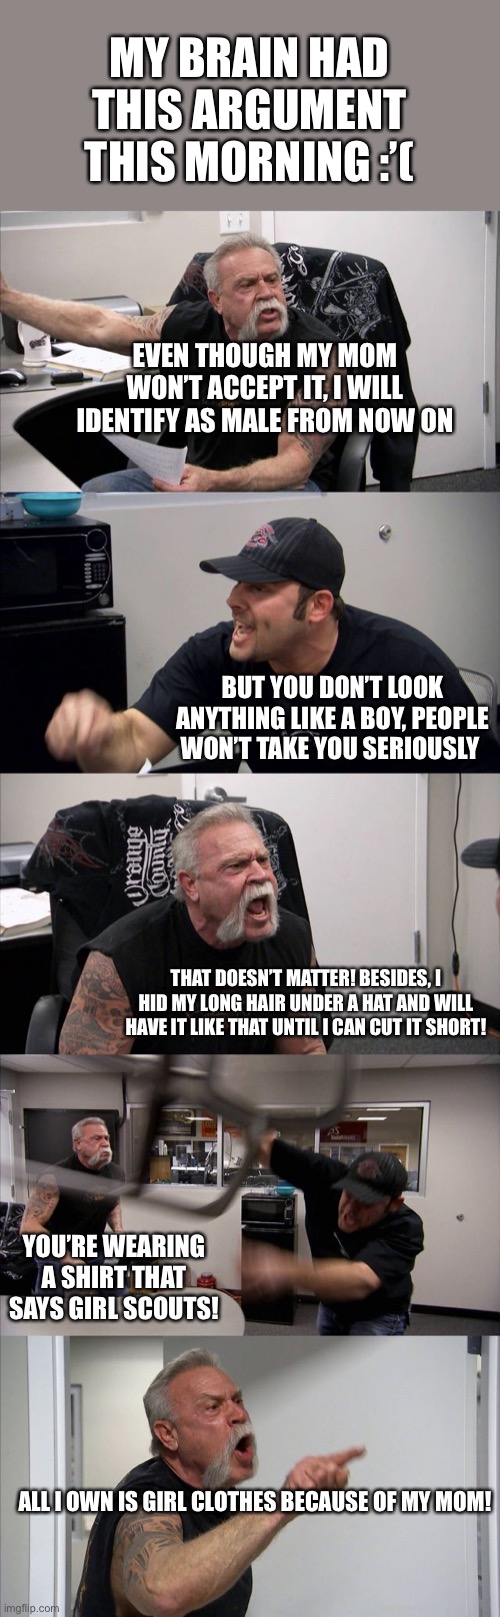 I’ll sort this out eventually I’m sure | MY BRAIN HAD THIS ARGUMENT THIS MORNING :’(; EVEN THOUGH MY MOM WON’T ACCEPT IT, I WILL IDENTIFY AS MALE FROM NOW ON; BUT YOU DON’T LOOK ANYTHING LIKE A BOY, PEOPLE WON’T TAKE YOU SERIOUSLY; THAT DOESN’T MATTER! BESIDES, I HID MY LONG HAIR UNDER A HAT AND WILL HAVE IT LIKE THAT UNTIL I CAN CUT IT SHORT! YOU’RE WEARING A SHIRT THAT SAYS GIRL SCOUTS! ALL I OWN IS GIRL CLOTHES BECAUSE OF MY MOM! | image tagged in memes,american chopper argument,lgbtq,lgbt,transgender | made w/ Imgflip meme maker